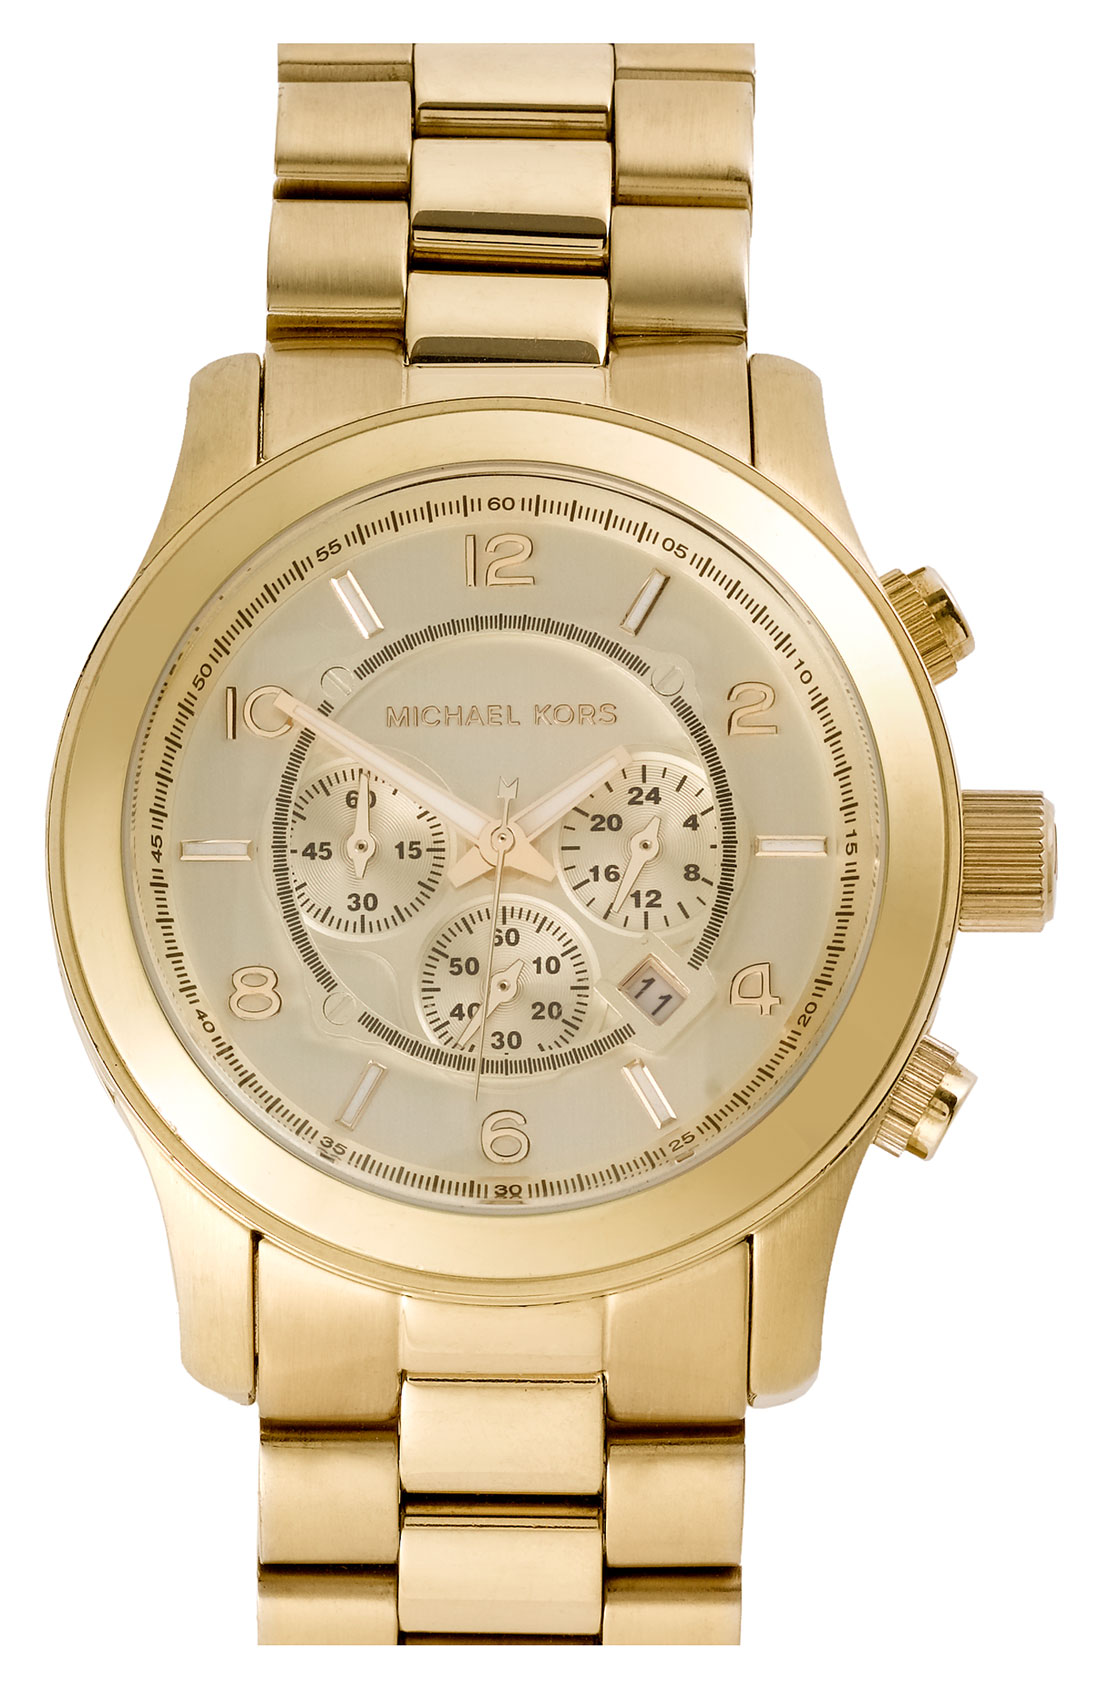 Men’s gold watches – The perfect men’s jewellery